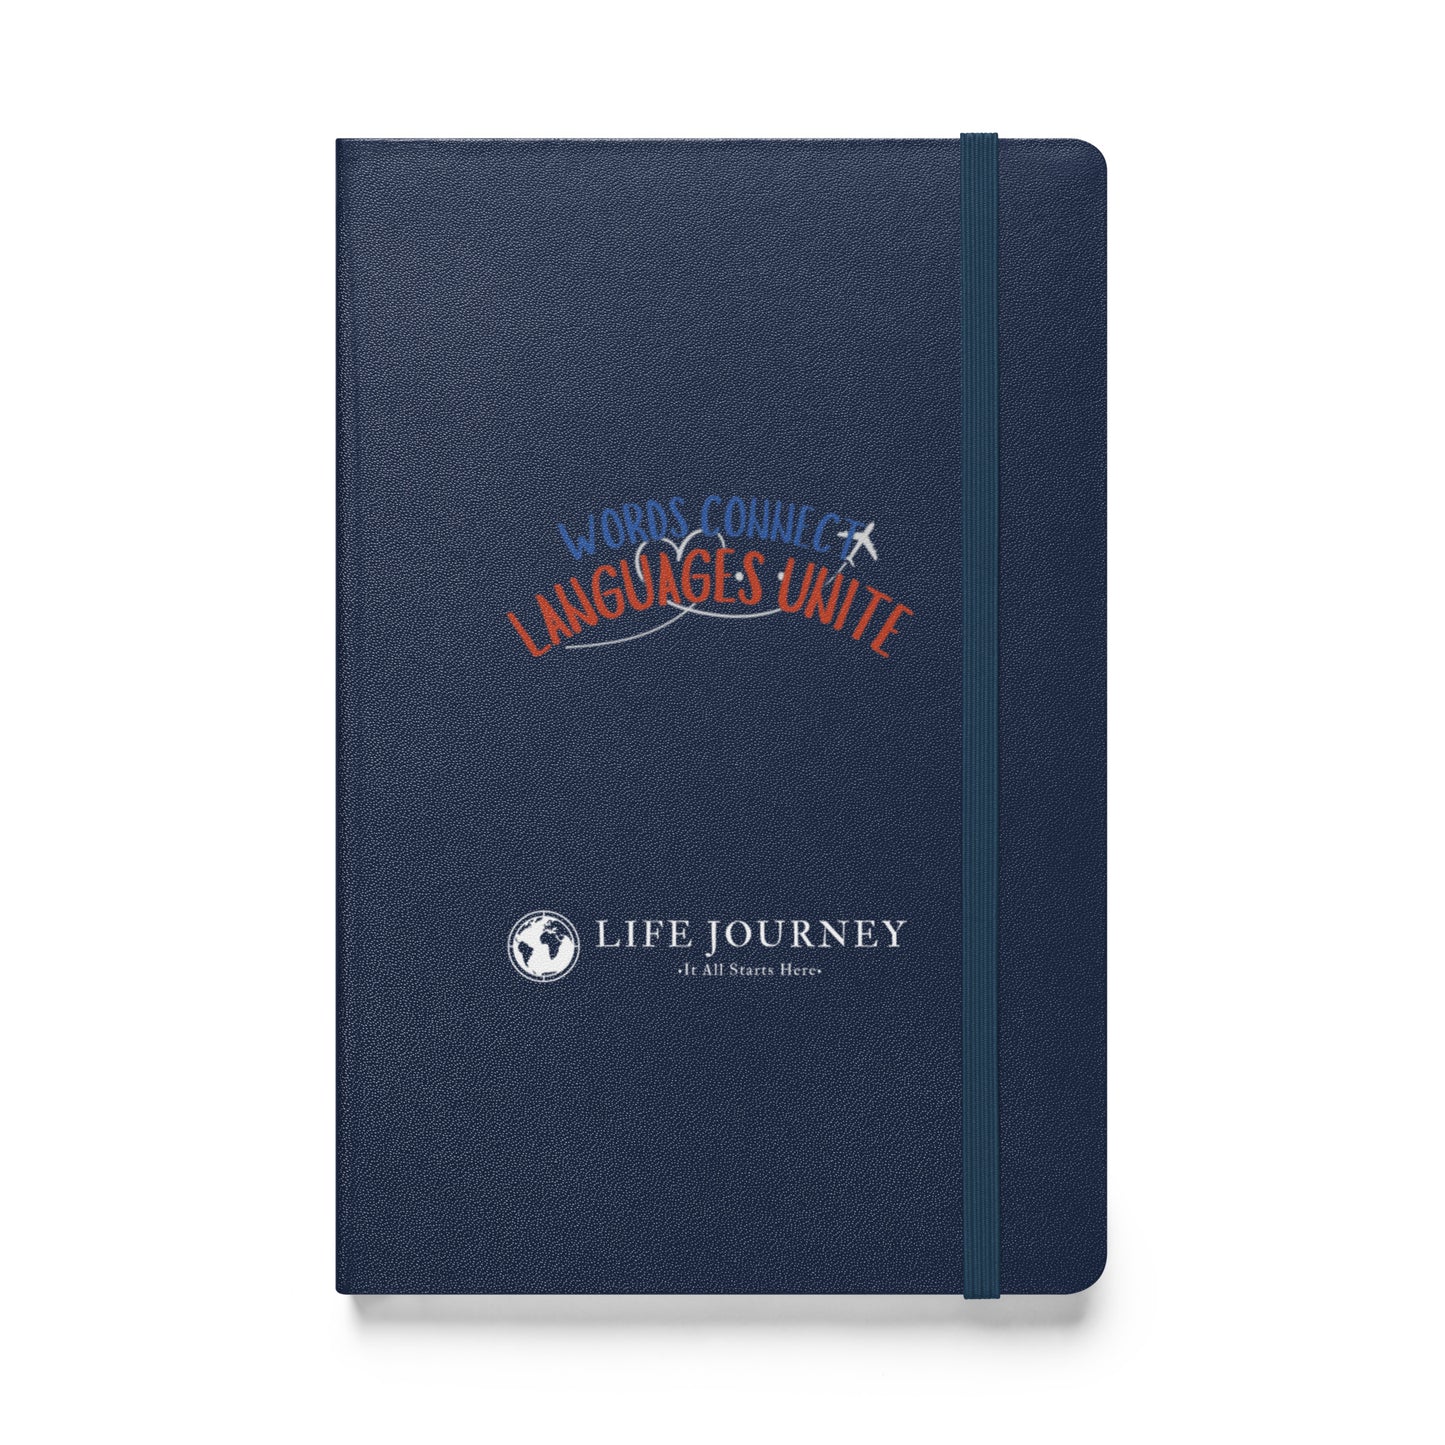 Hardcover bound notebook Words Connect Languages Unite